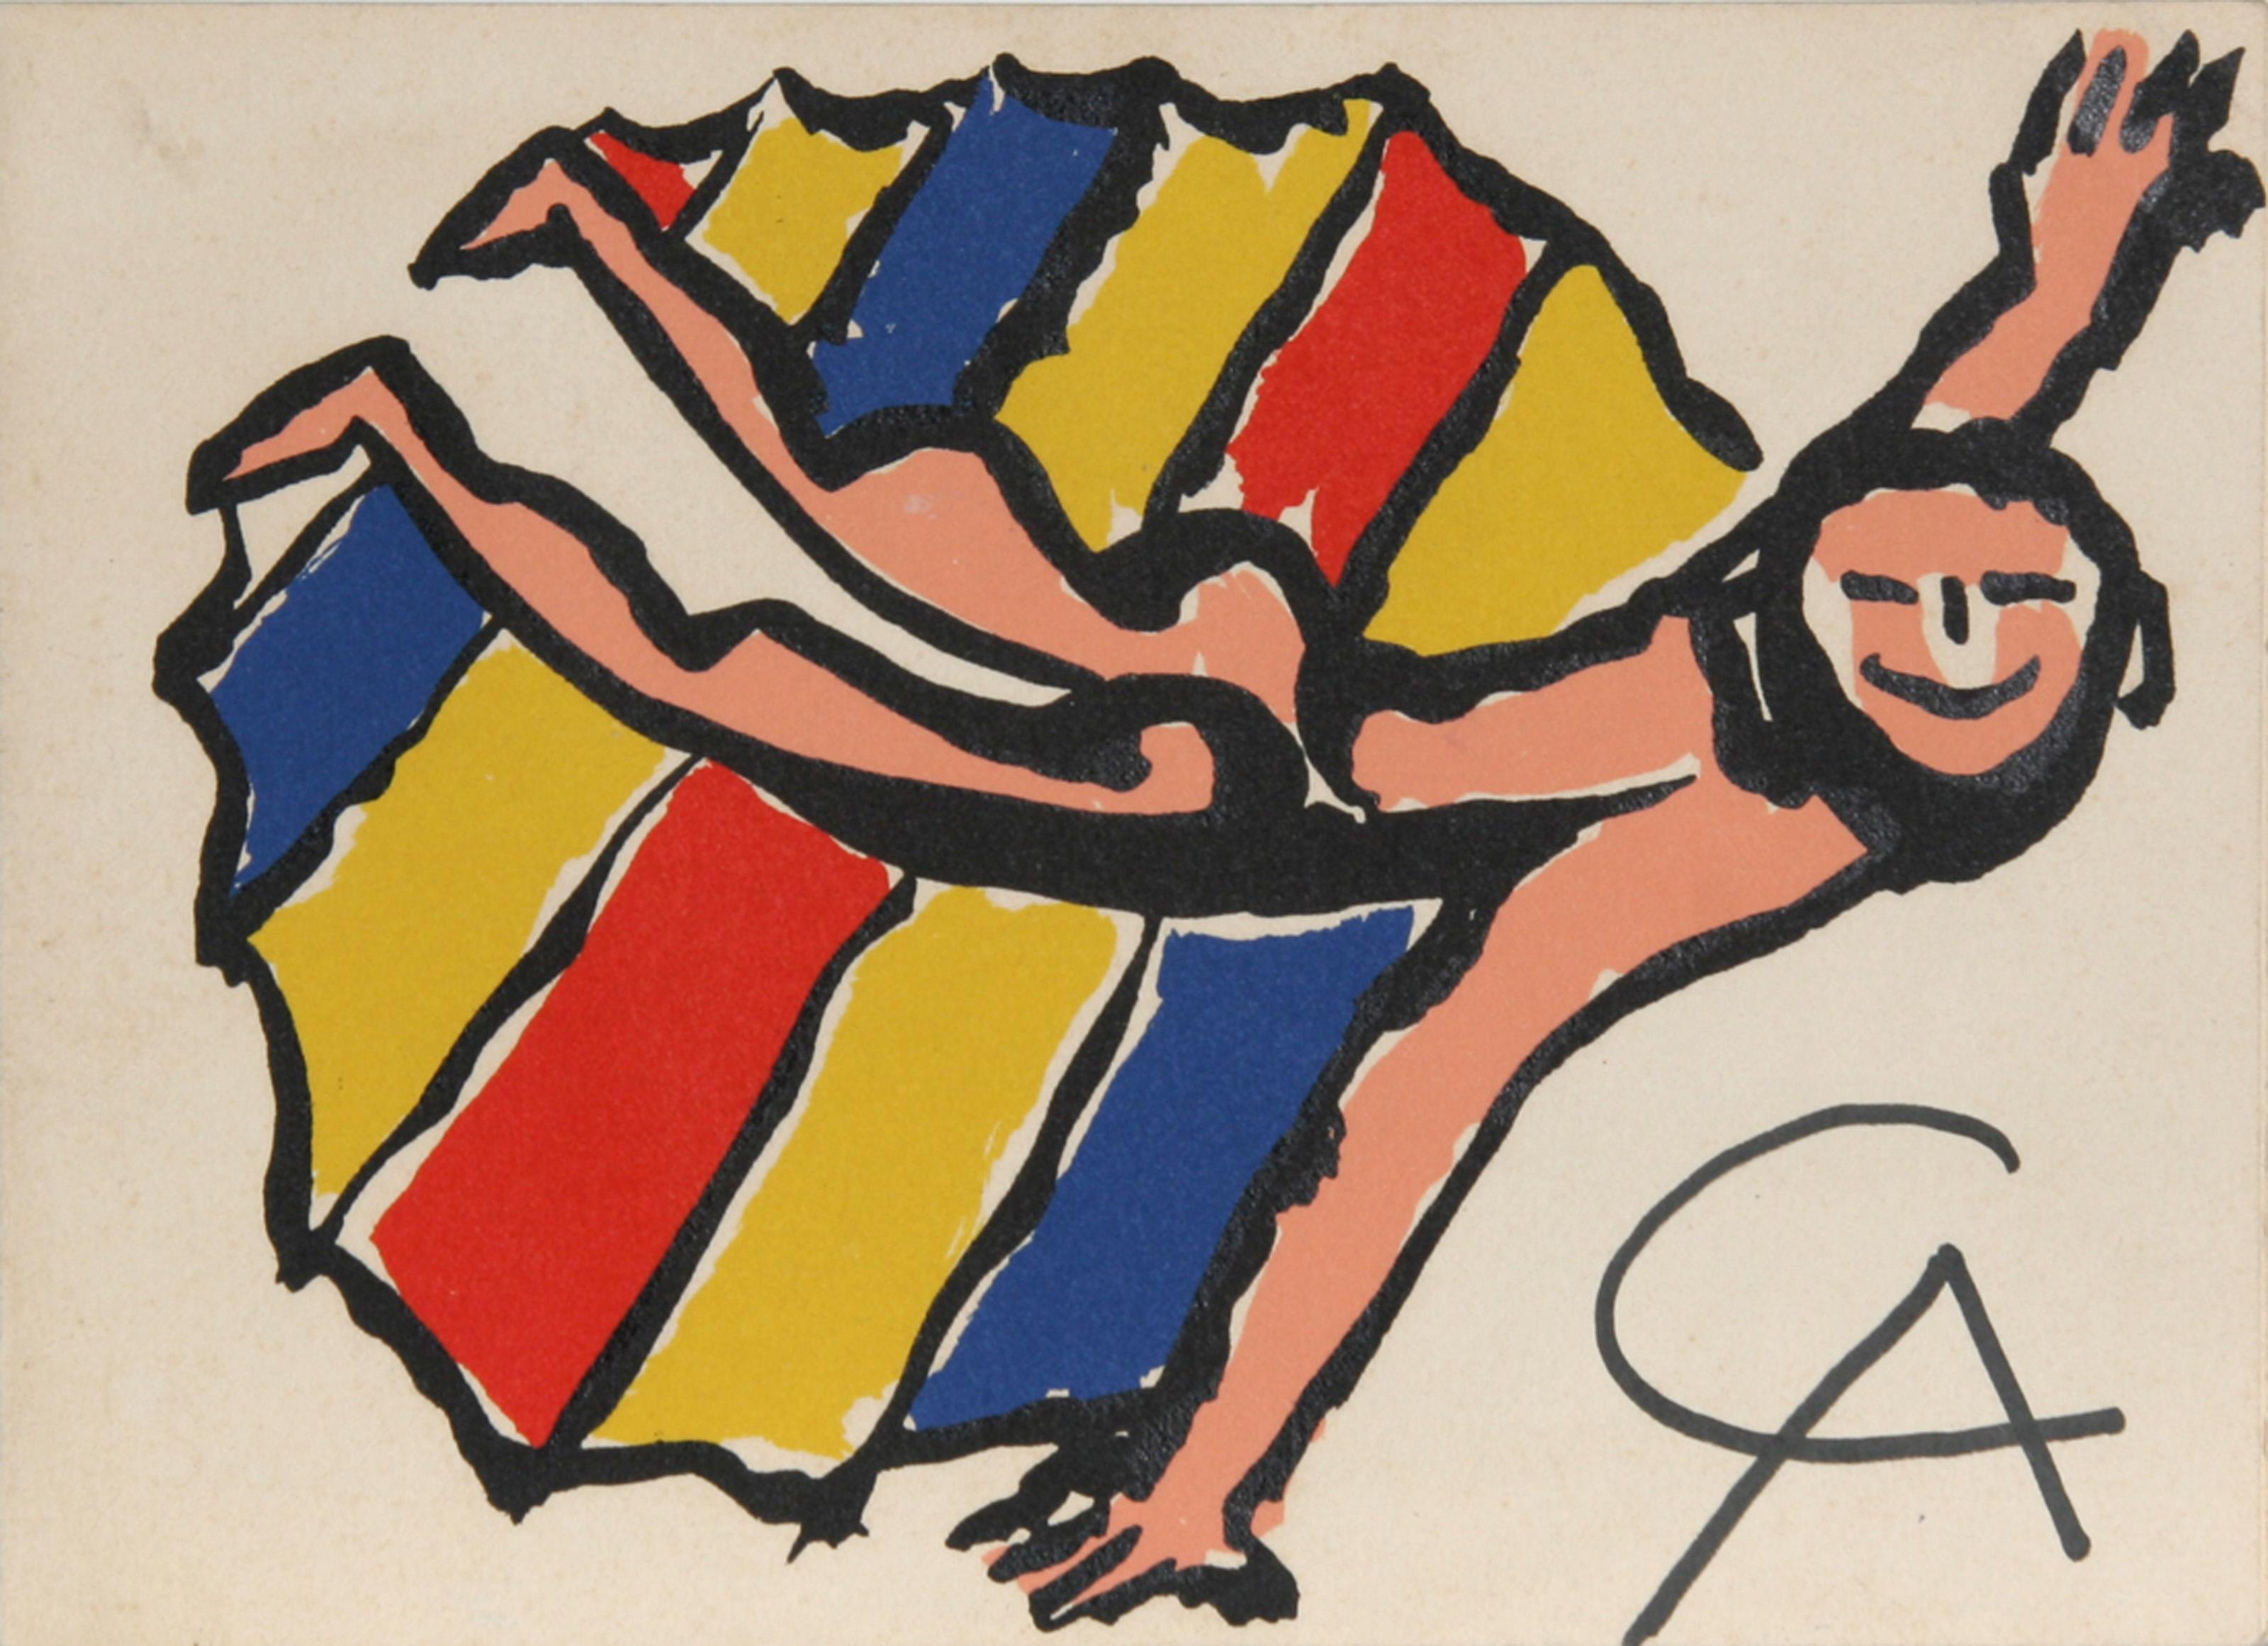 Alexander Calder, American (1898 - 1976) -  Invitation to Sandy's Air Party. Year: 1975, Medium: Lithograph, Size: 6.25 in. x 8.5 in. (15.88 cm x 21.59 cm) 